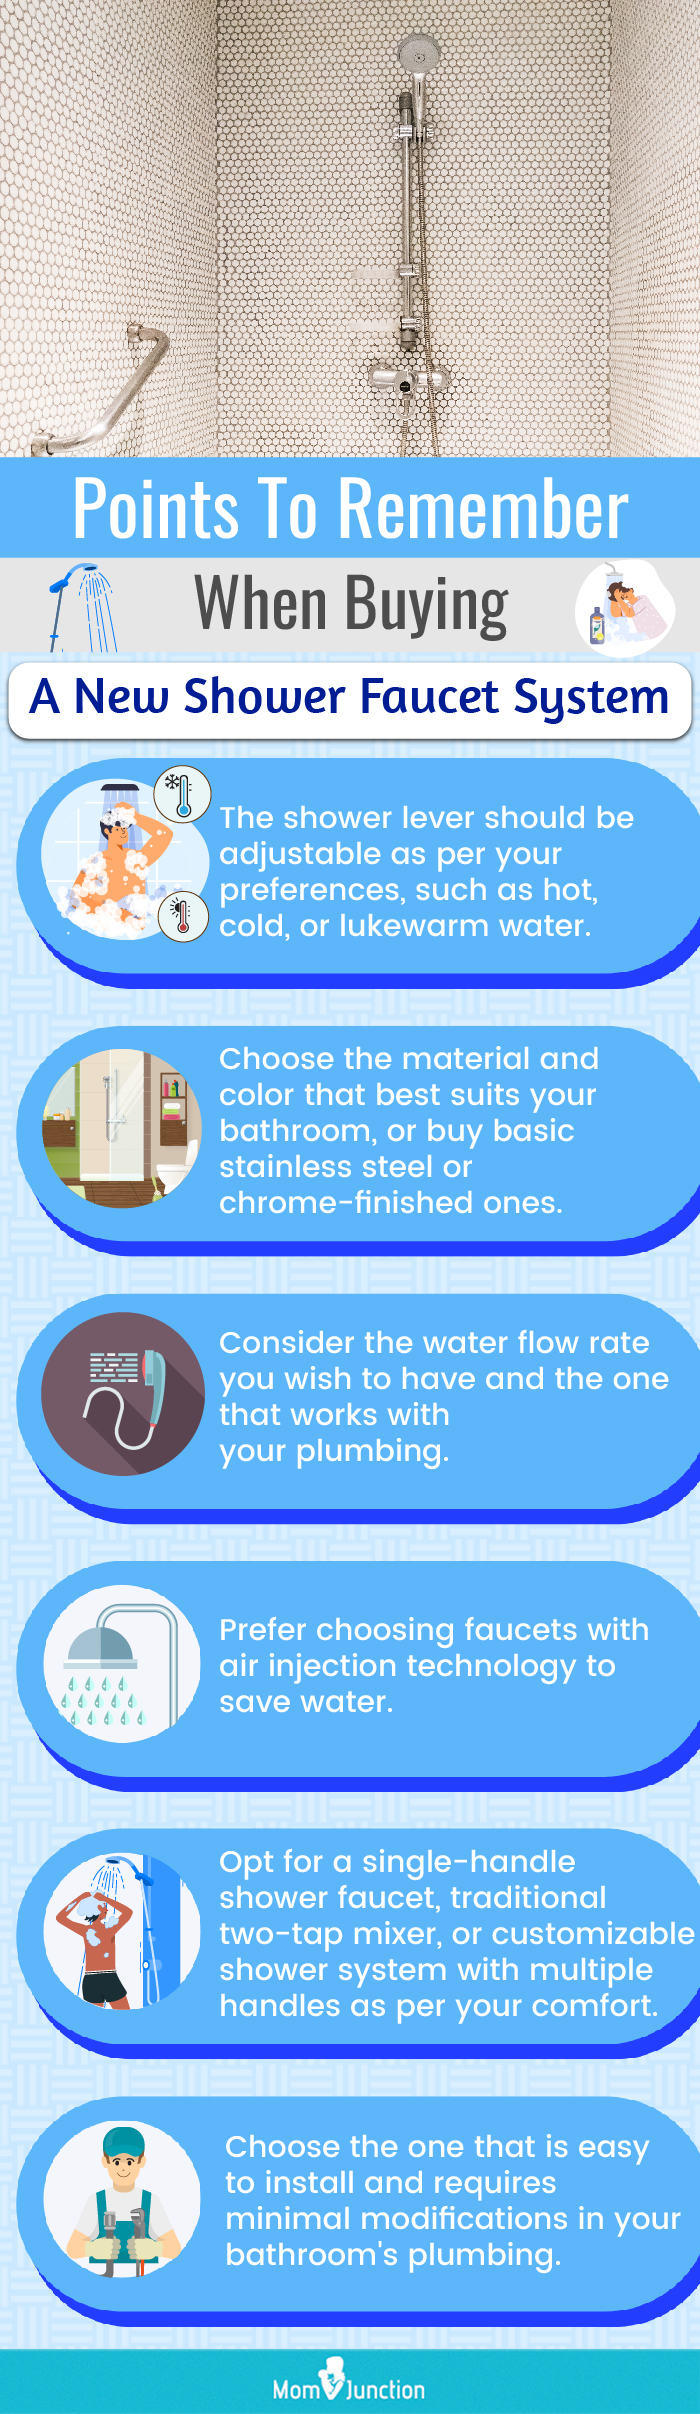 Points To Remember When Buying A New Shower Faucet System (infographic)